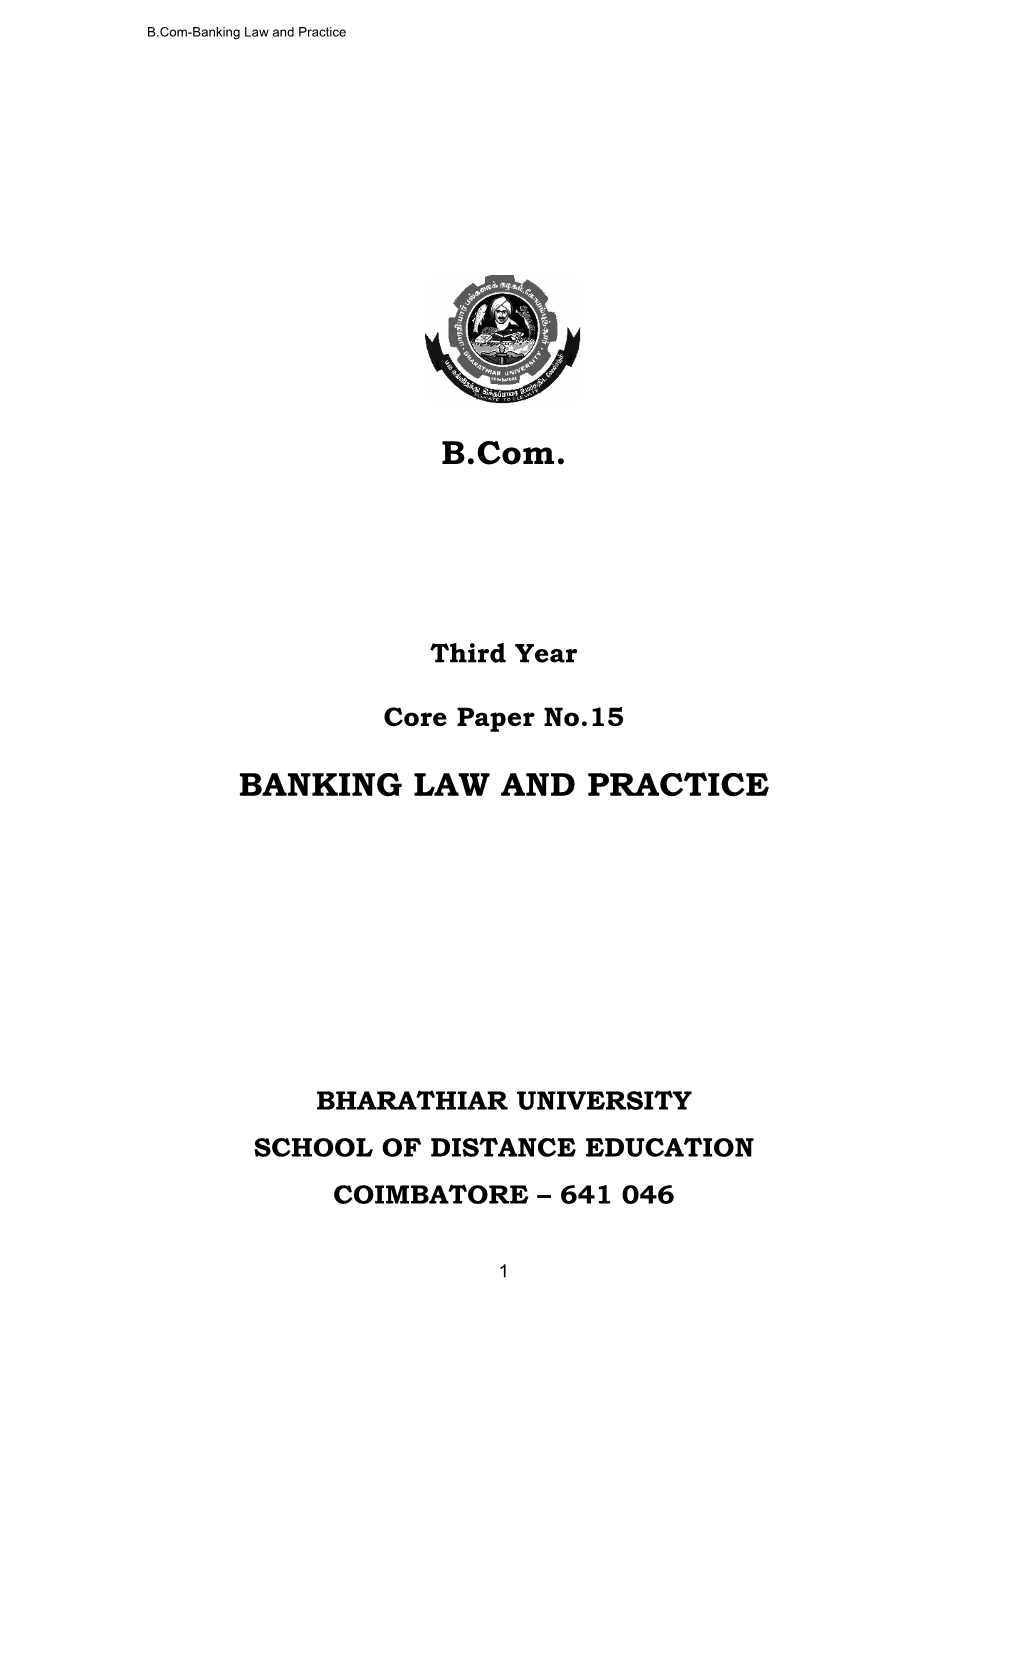 B.Com. BANKING LAW and PRACTICE